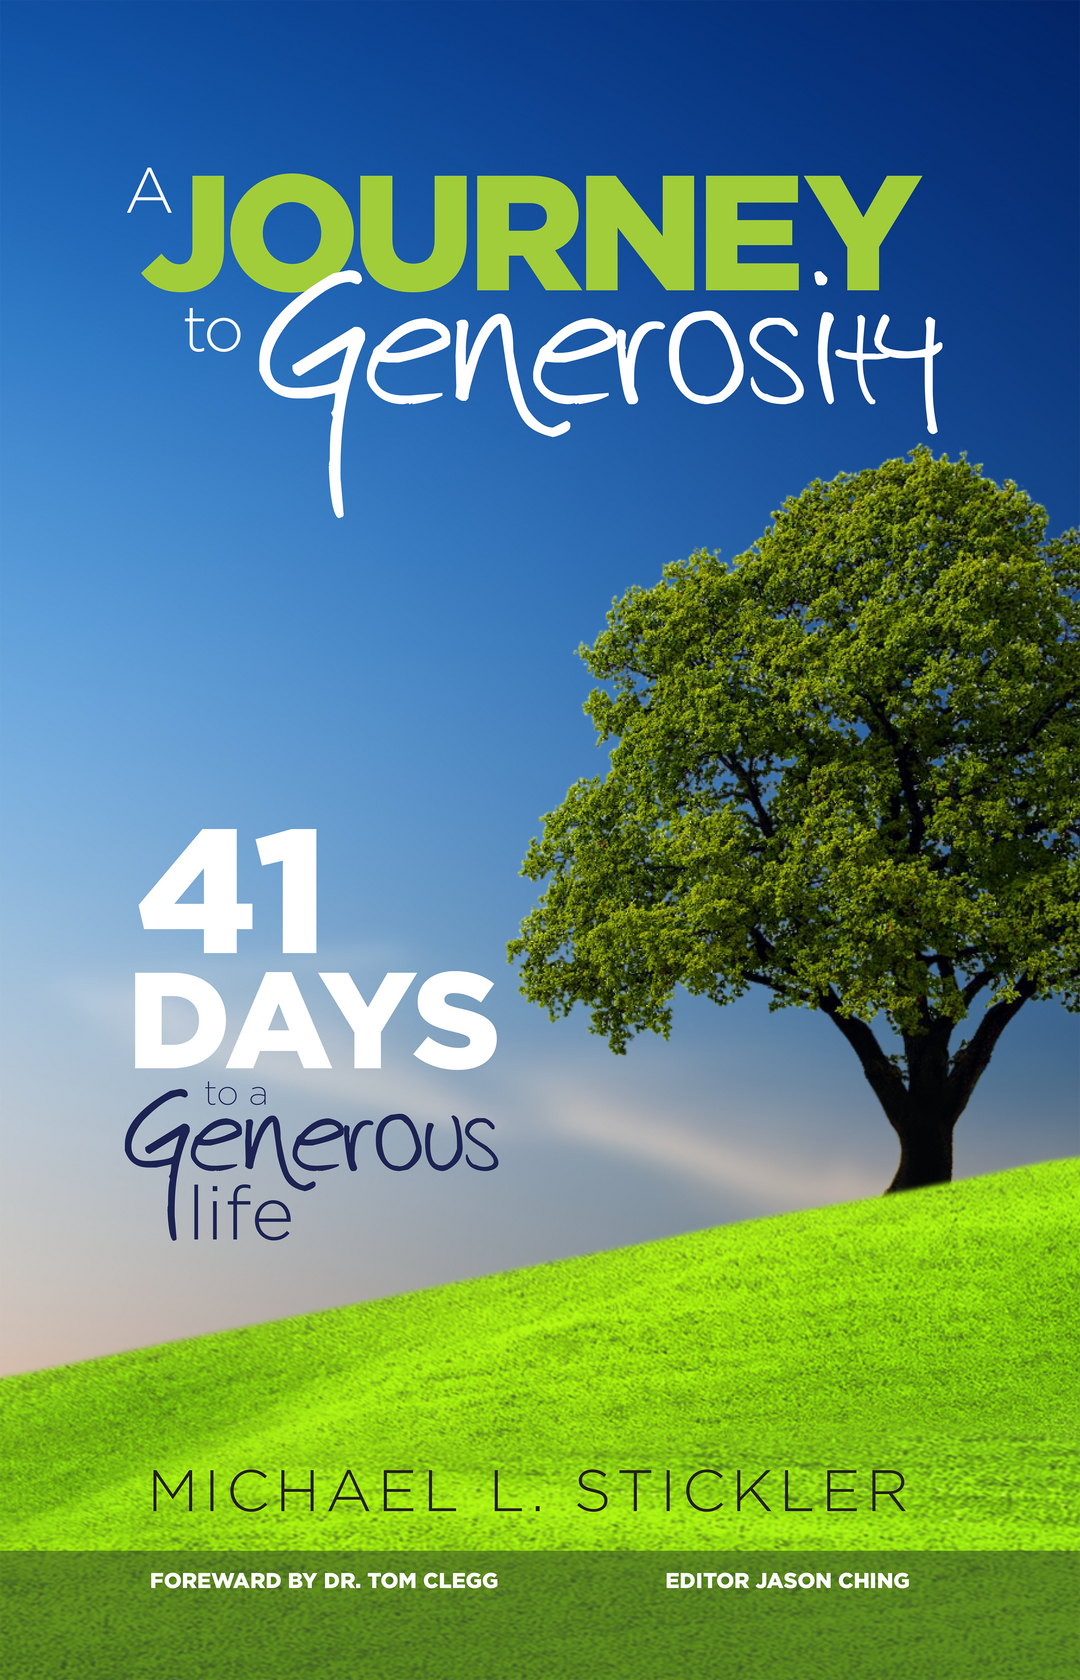 A Journey To Generosity - 41 Days to a Generous Life